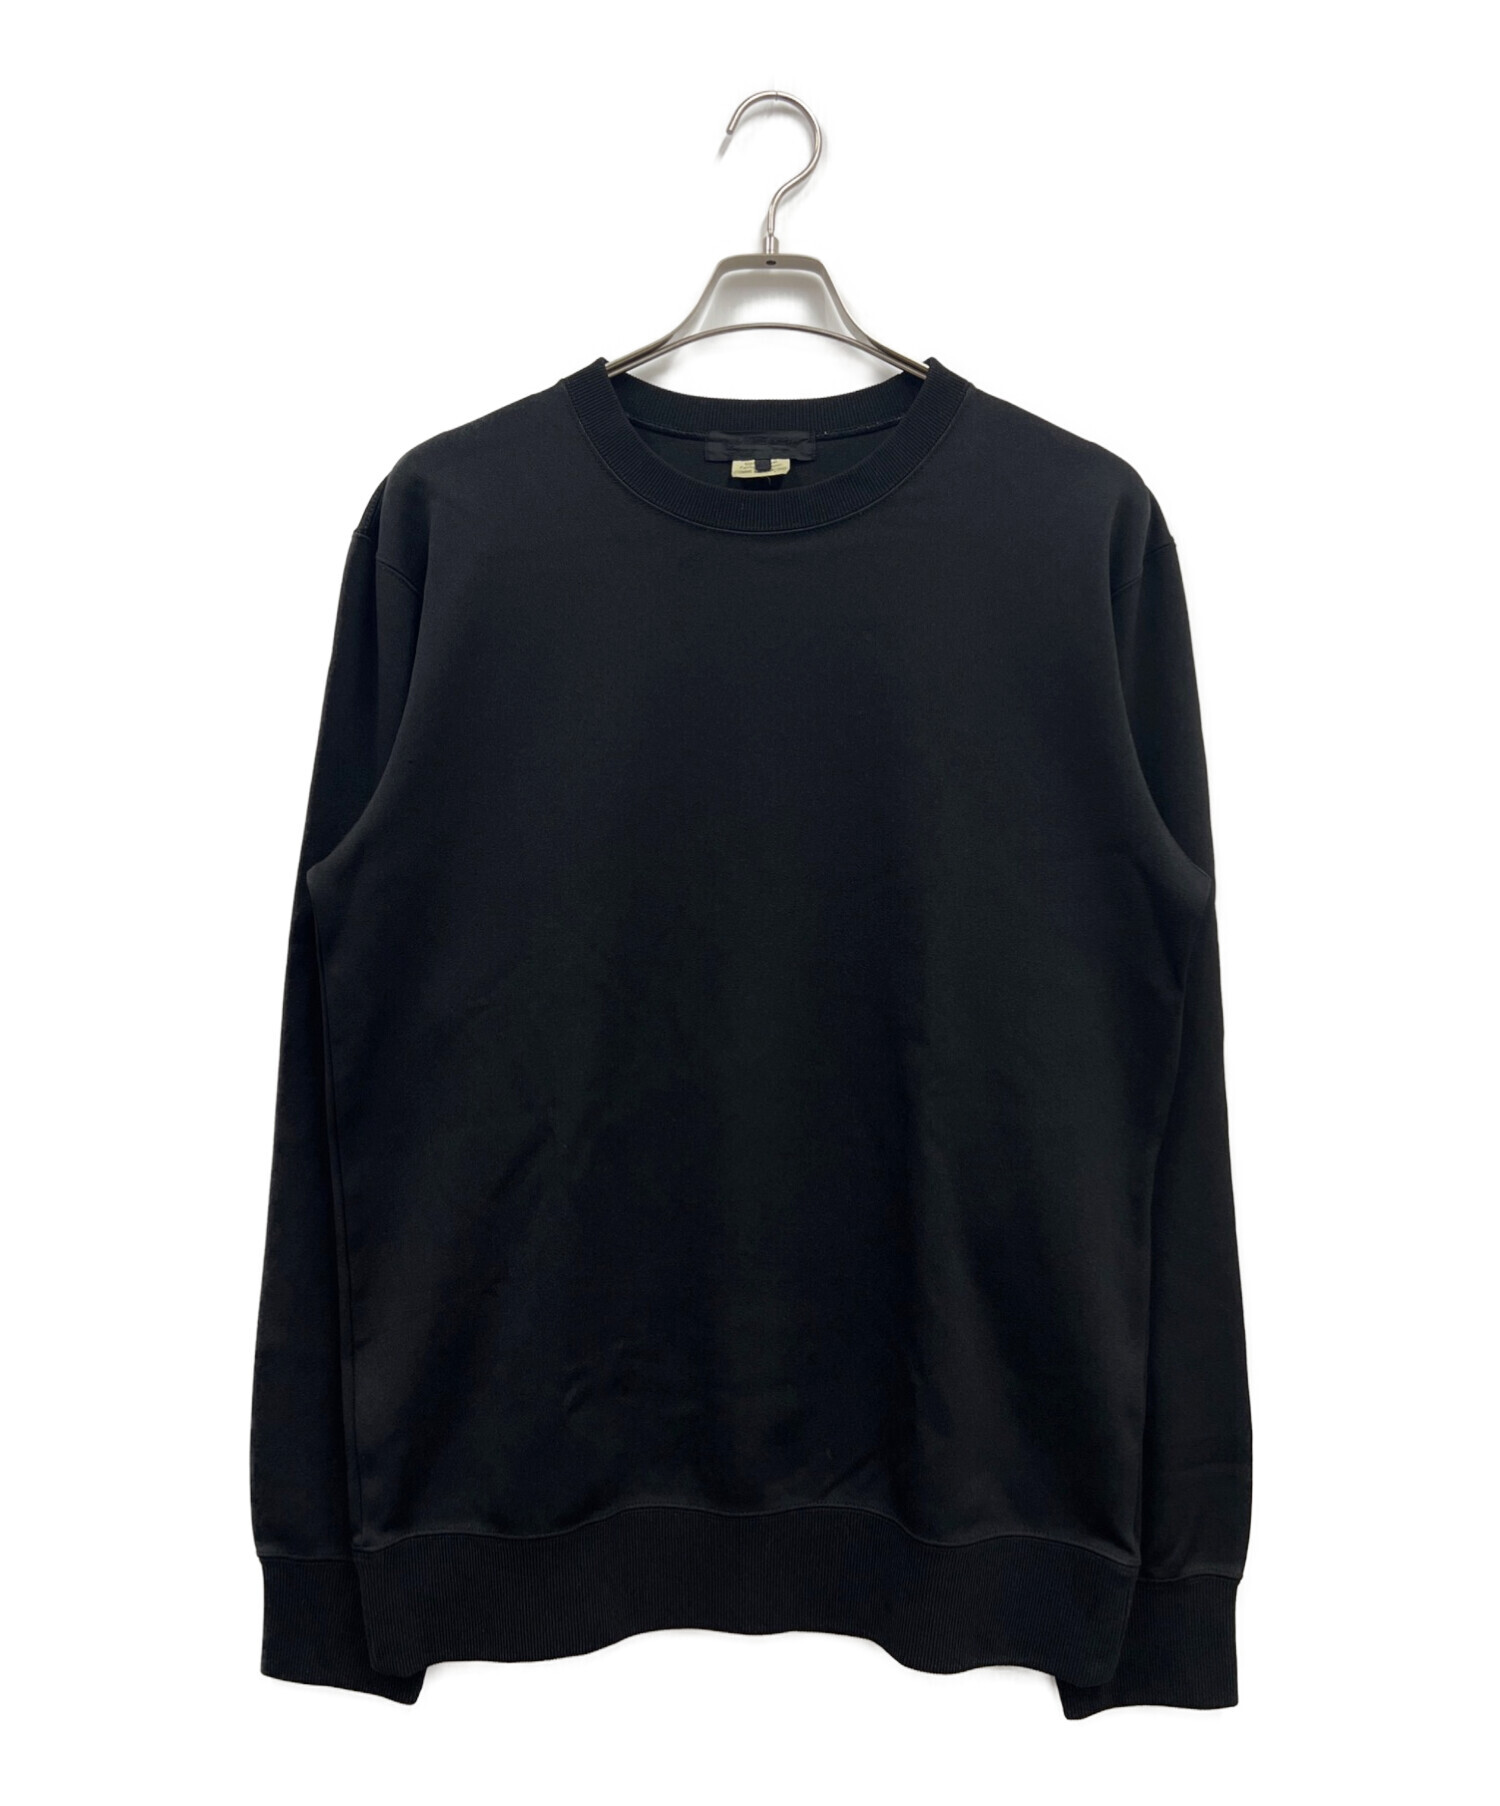 COMME des GARCONS HOMME スウェット M 黒